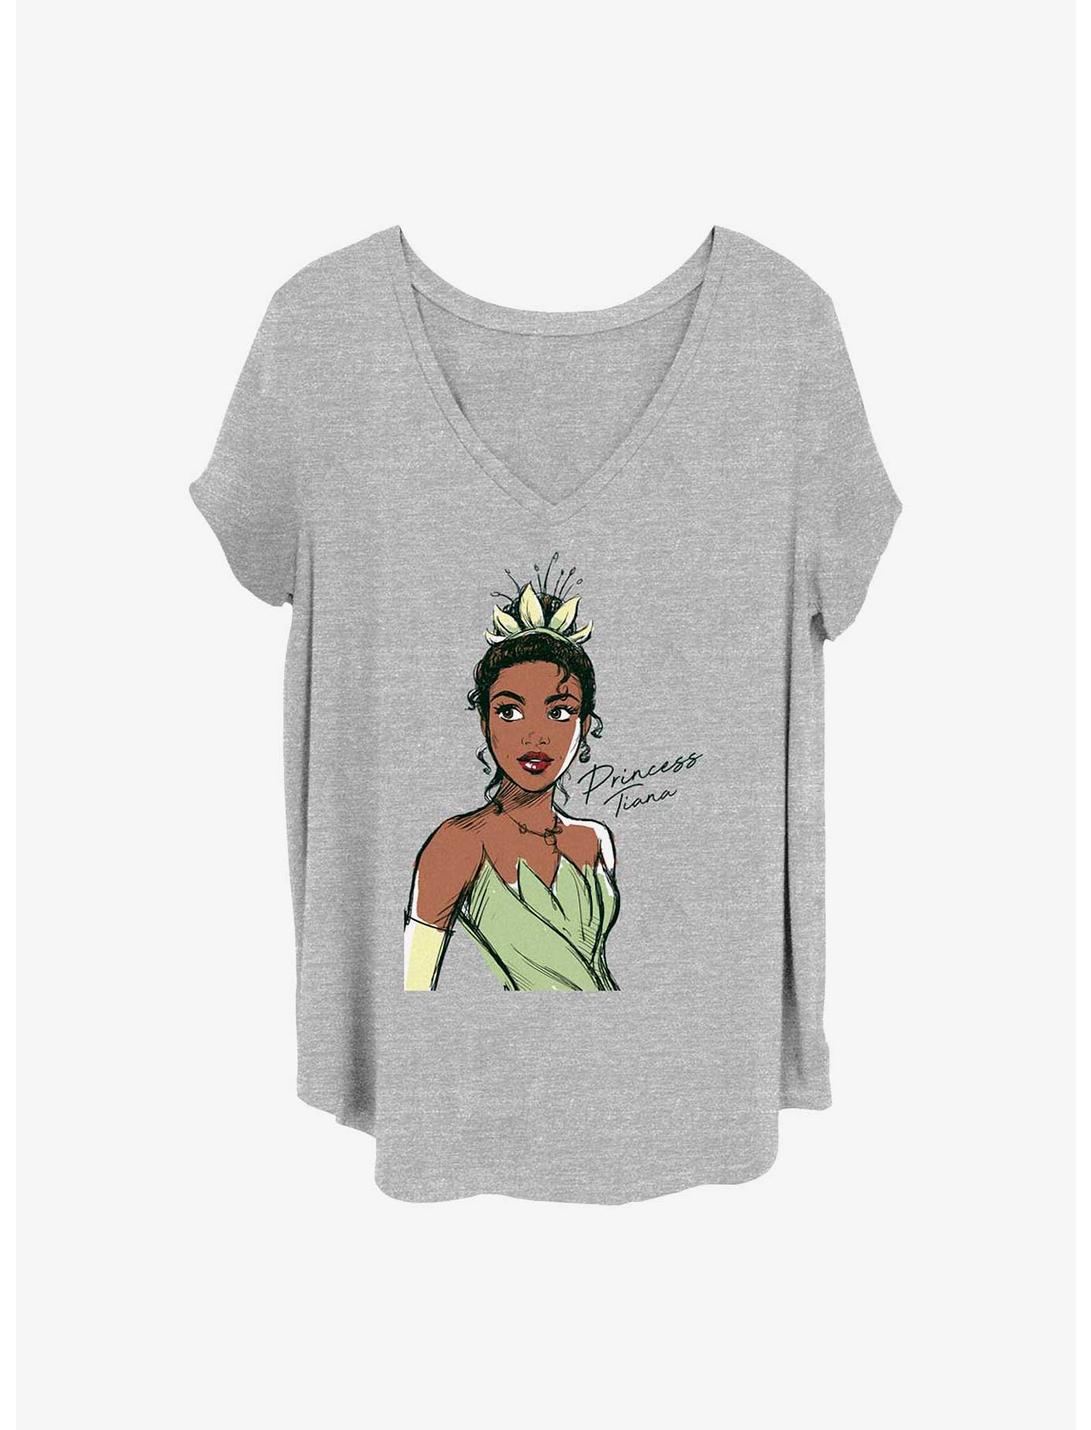 Disney The Princess and the Frog Fashion Tiana Girls T-Shirt Plus Size, HEATHER GR, hi-res